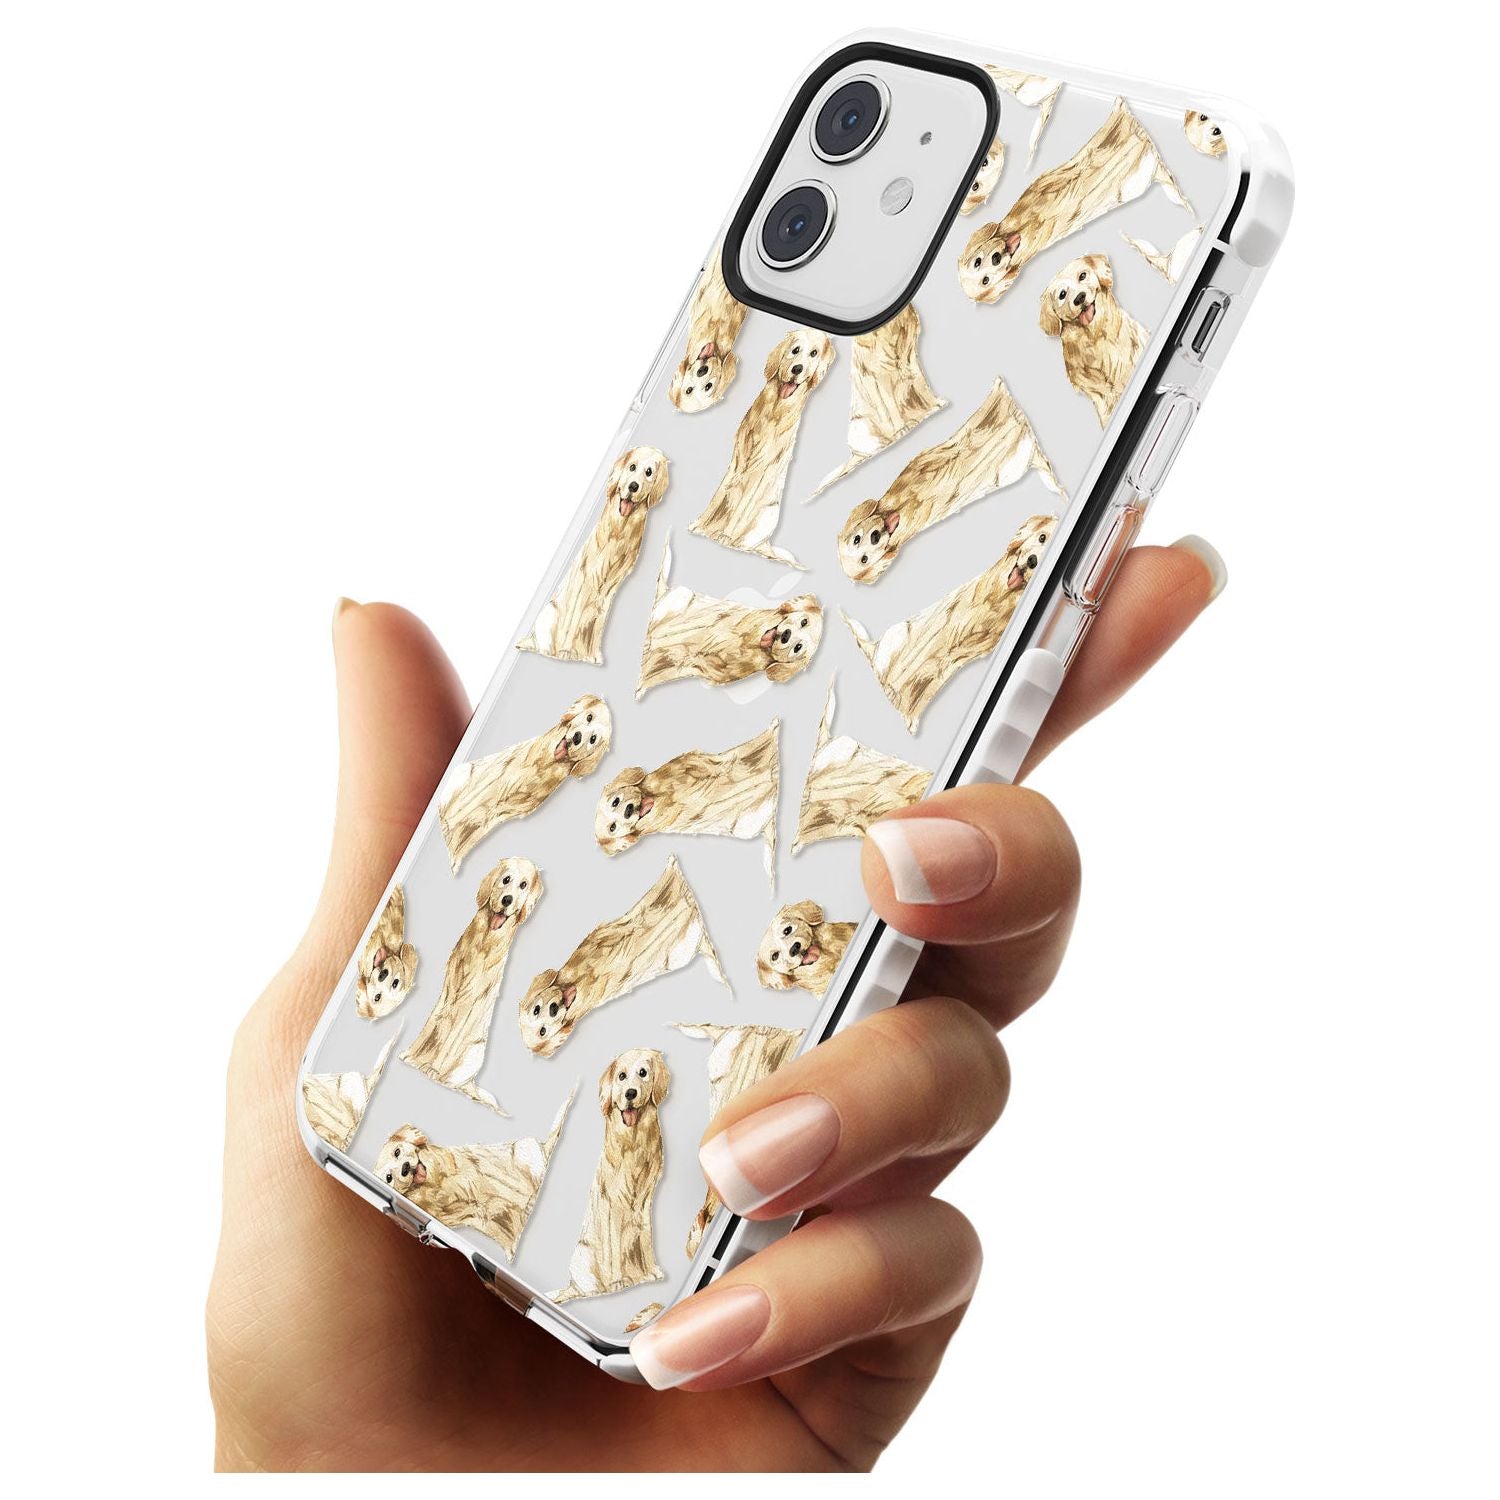 Golden Retriever Watercolour Dog Pattern Impact Phone Case for iPhone 11